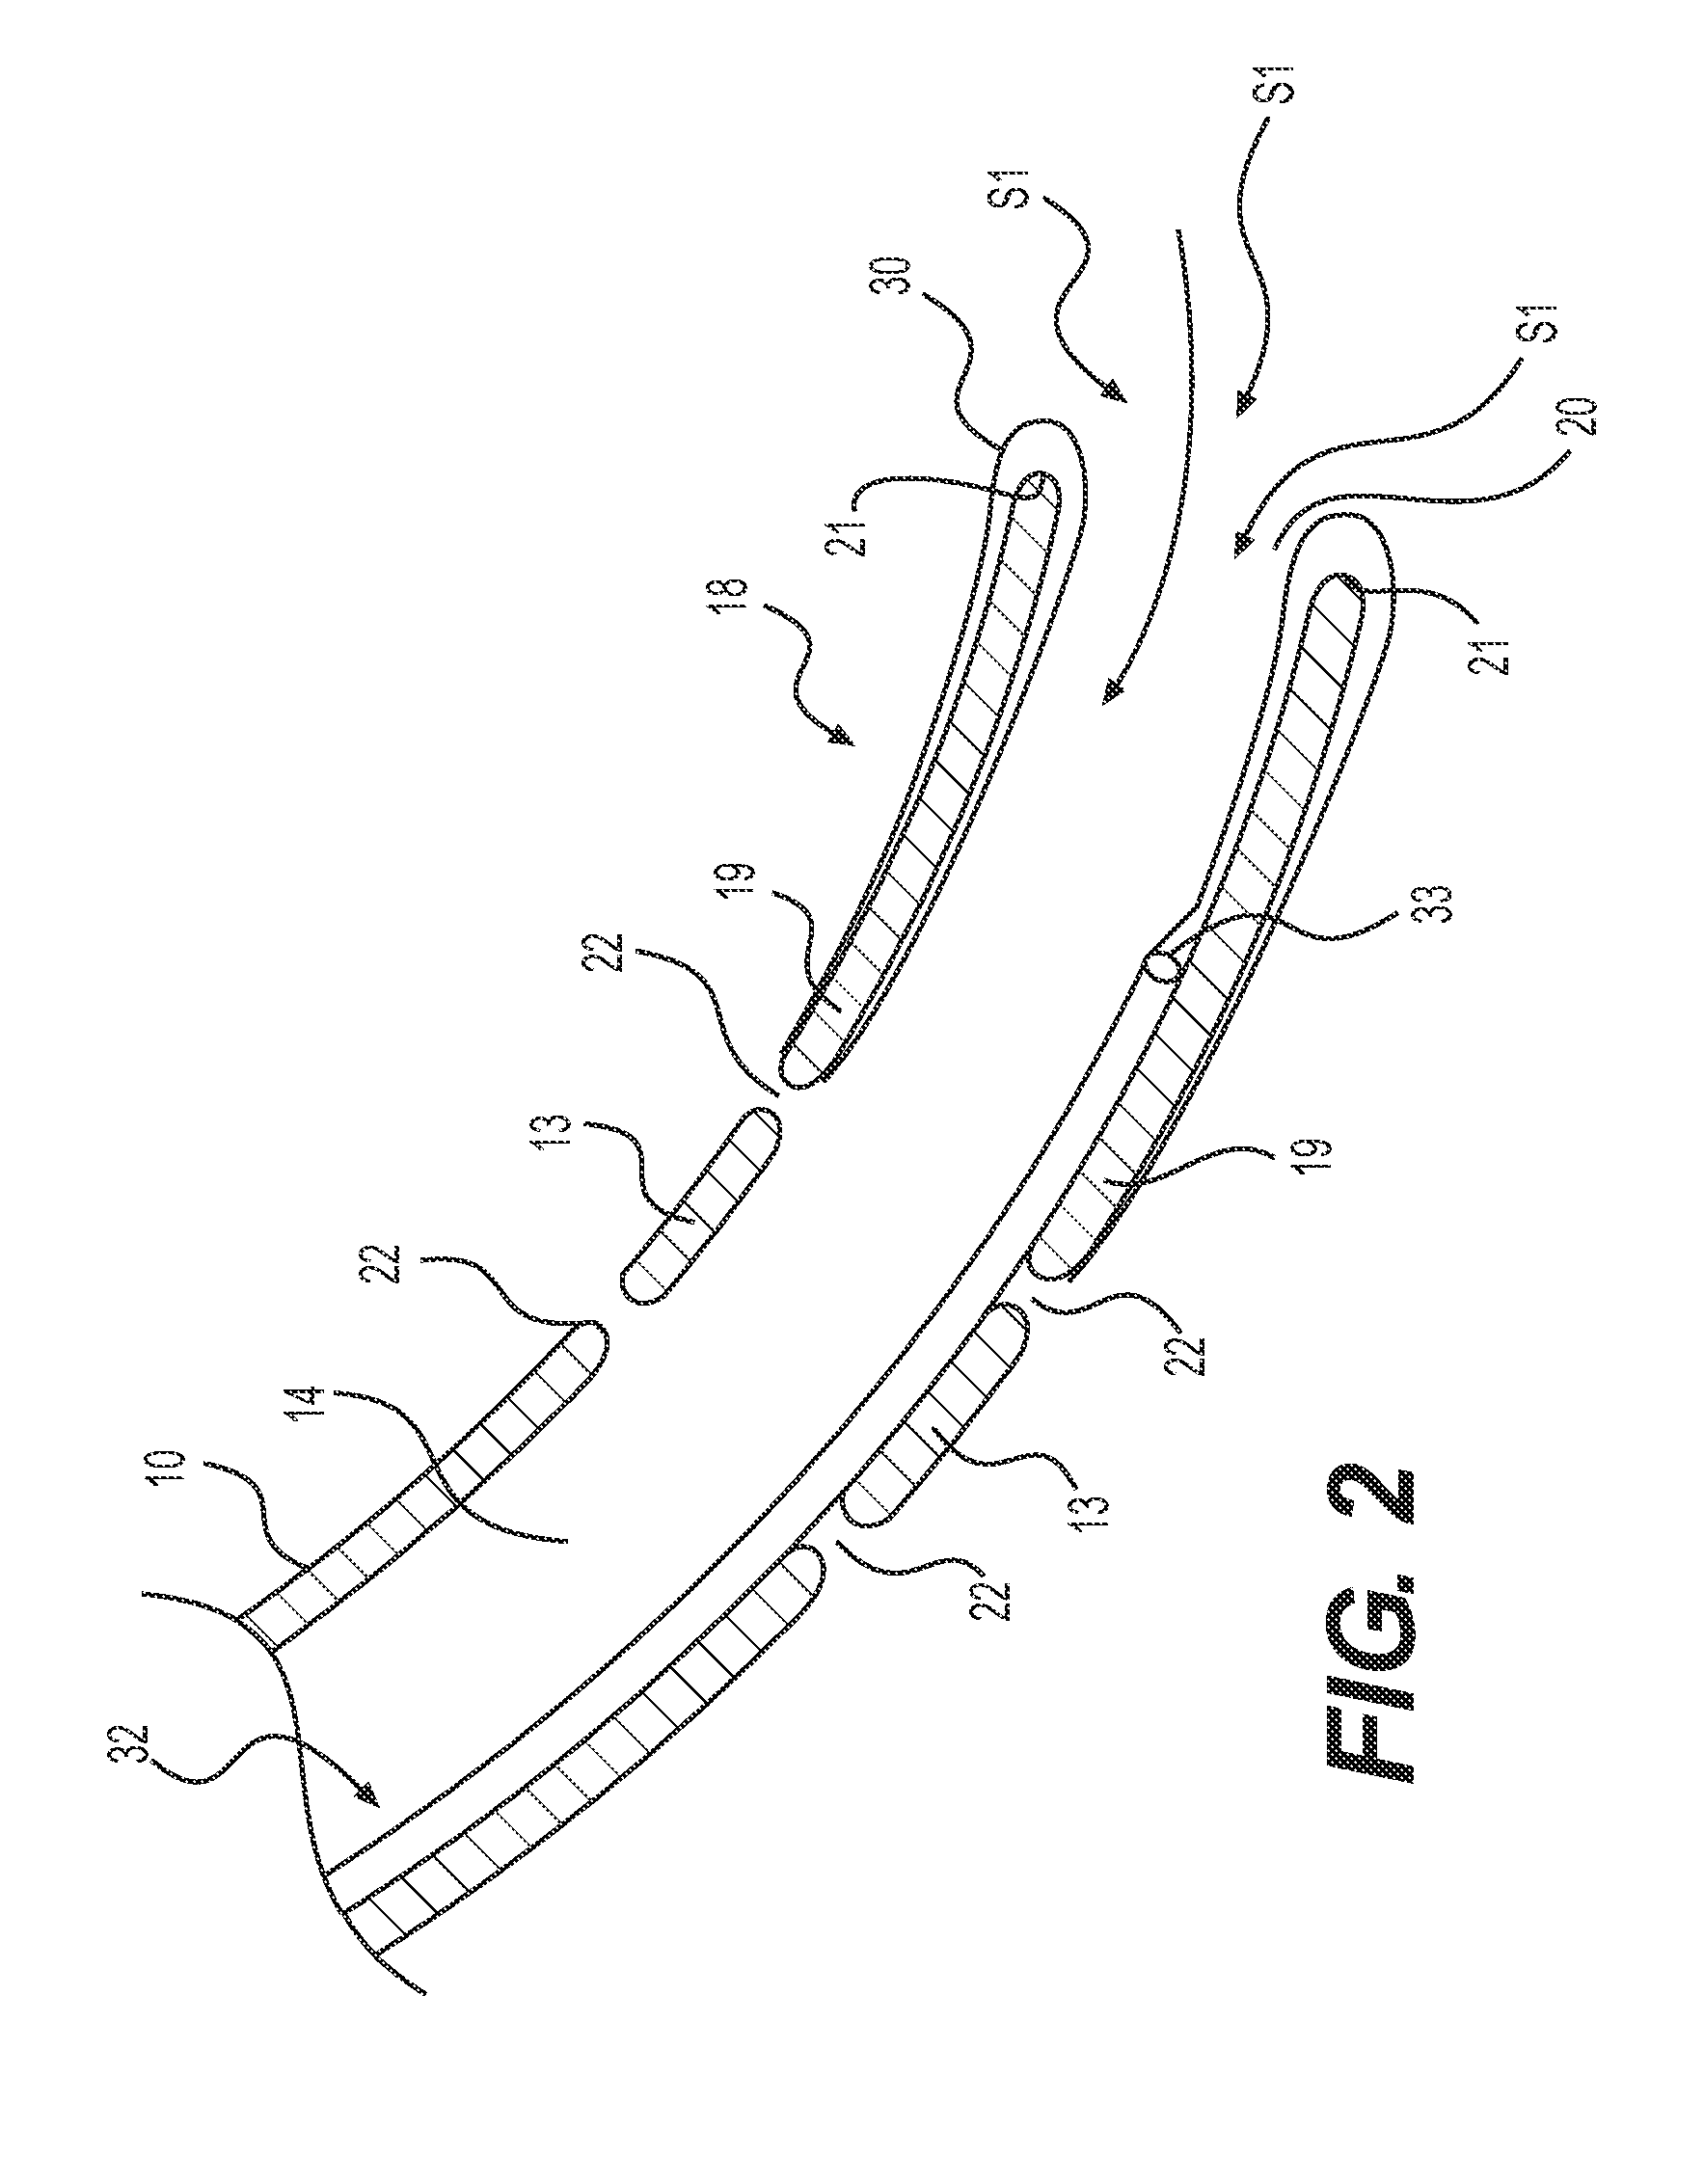 Suction catheter device and method